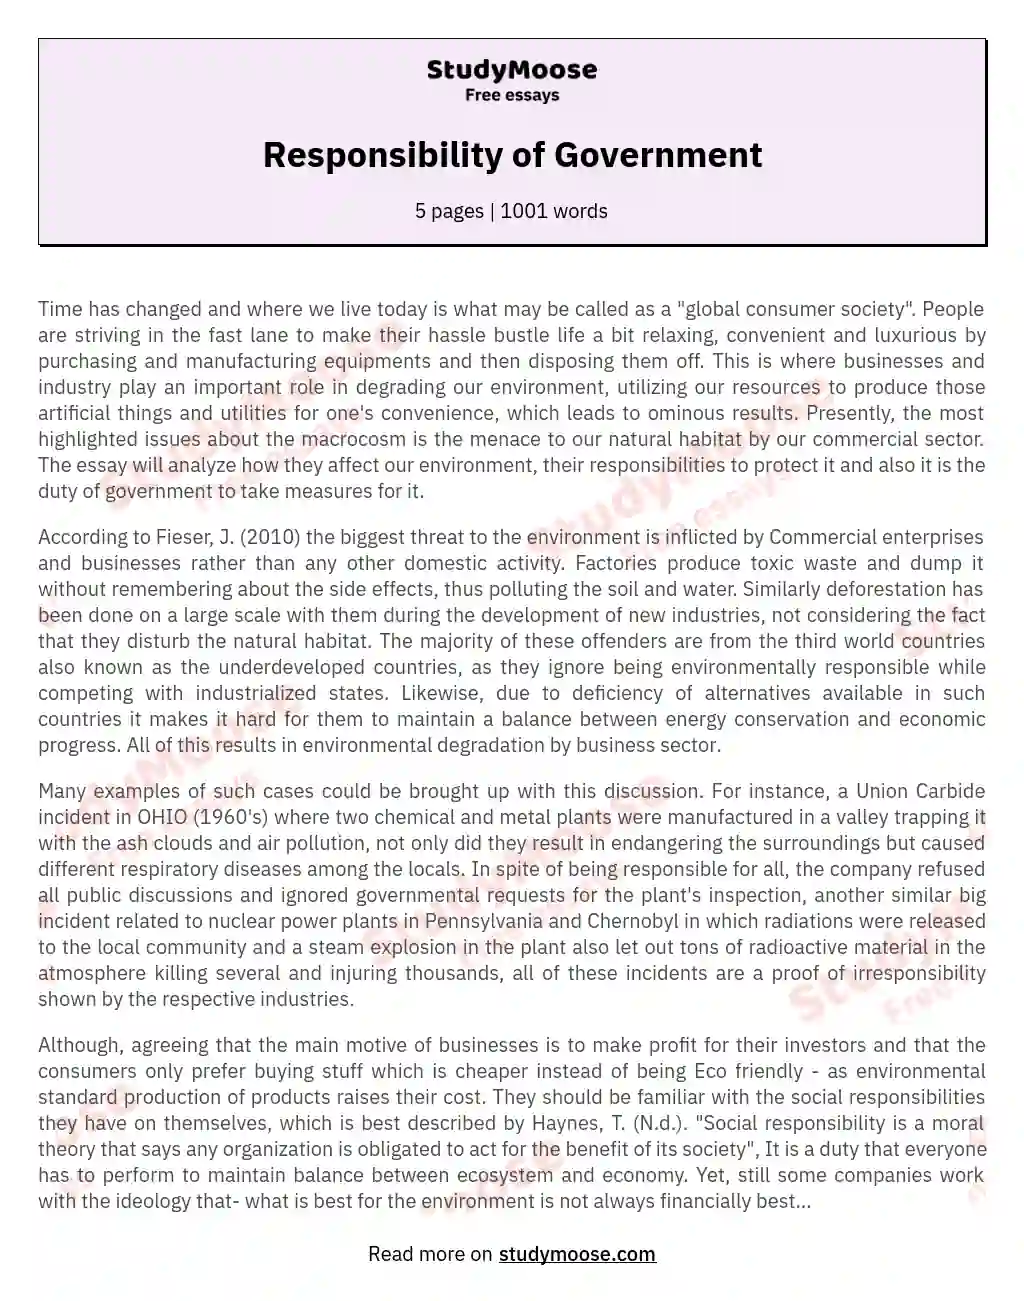 essay about government responsibility